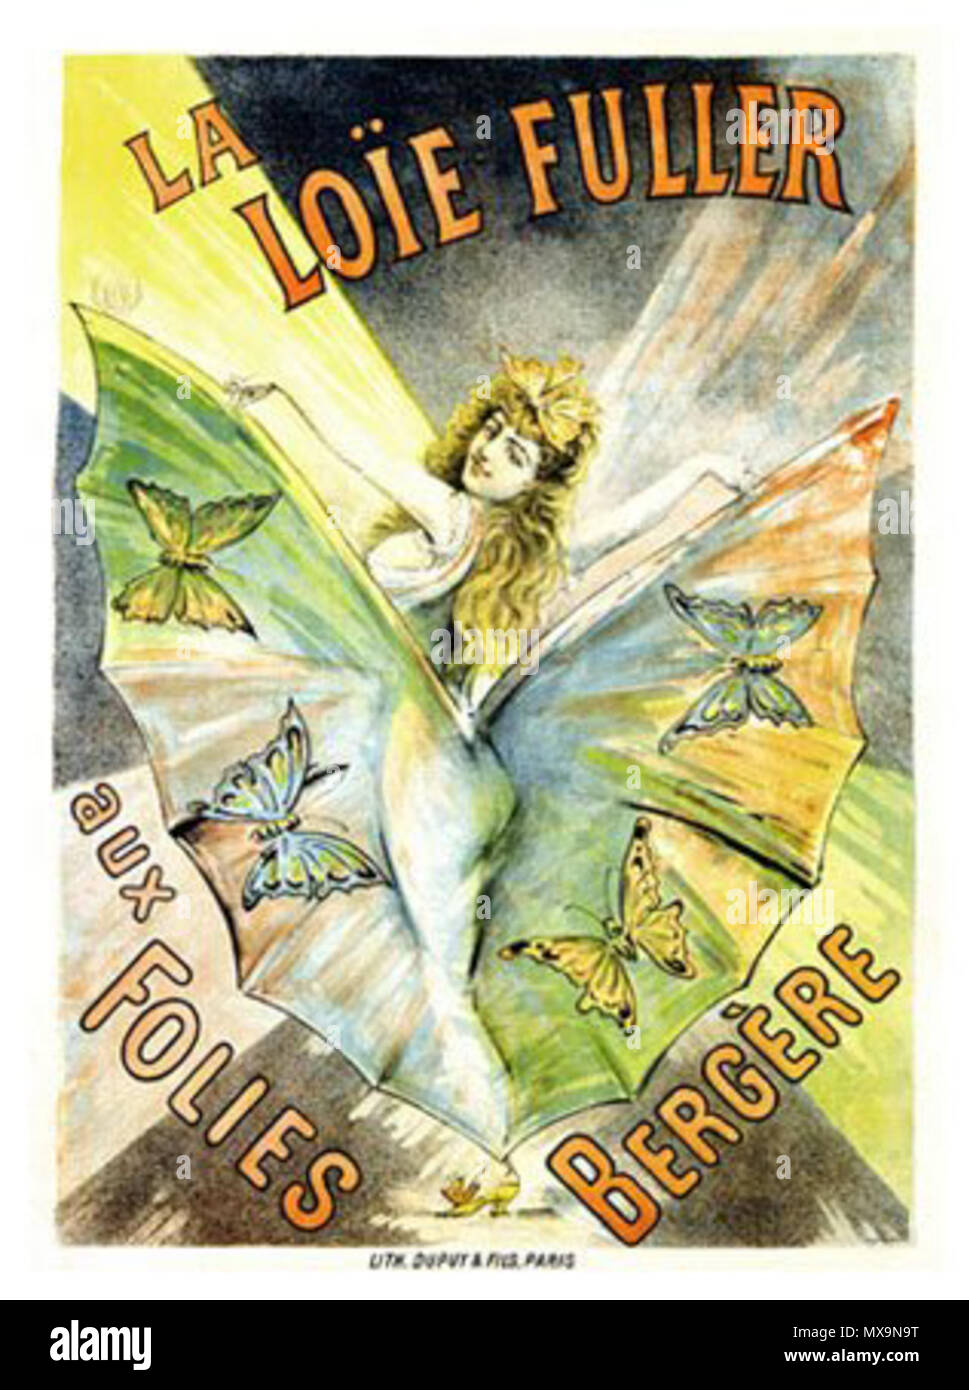 . Poster for Loïe Fuller at the Folies Bergère . The poster would date from the late 19th century. This file is lacking author information. 231 Loie Fuller Folies Bergere 01 Stock Photo